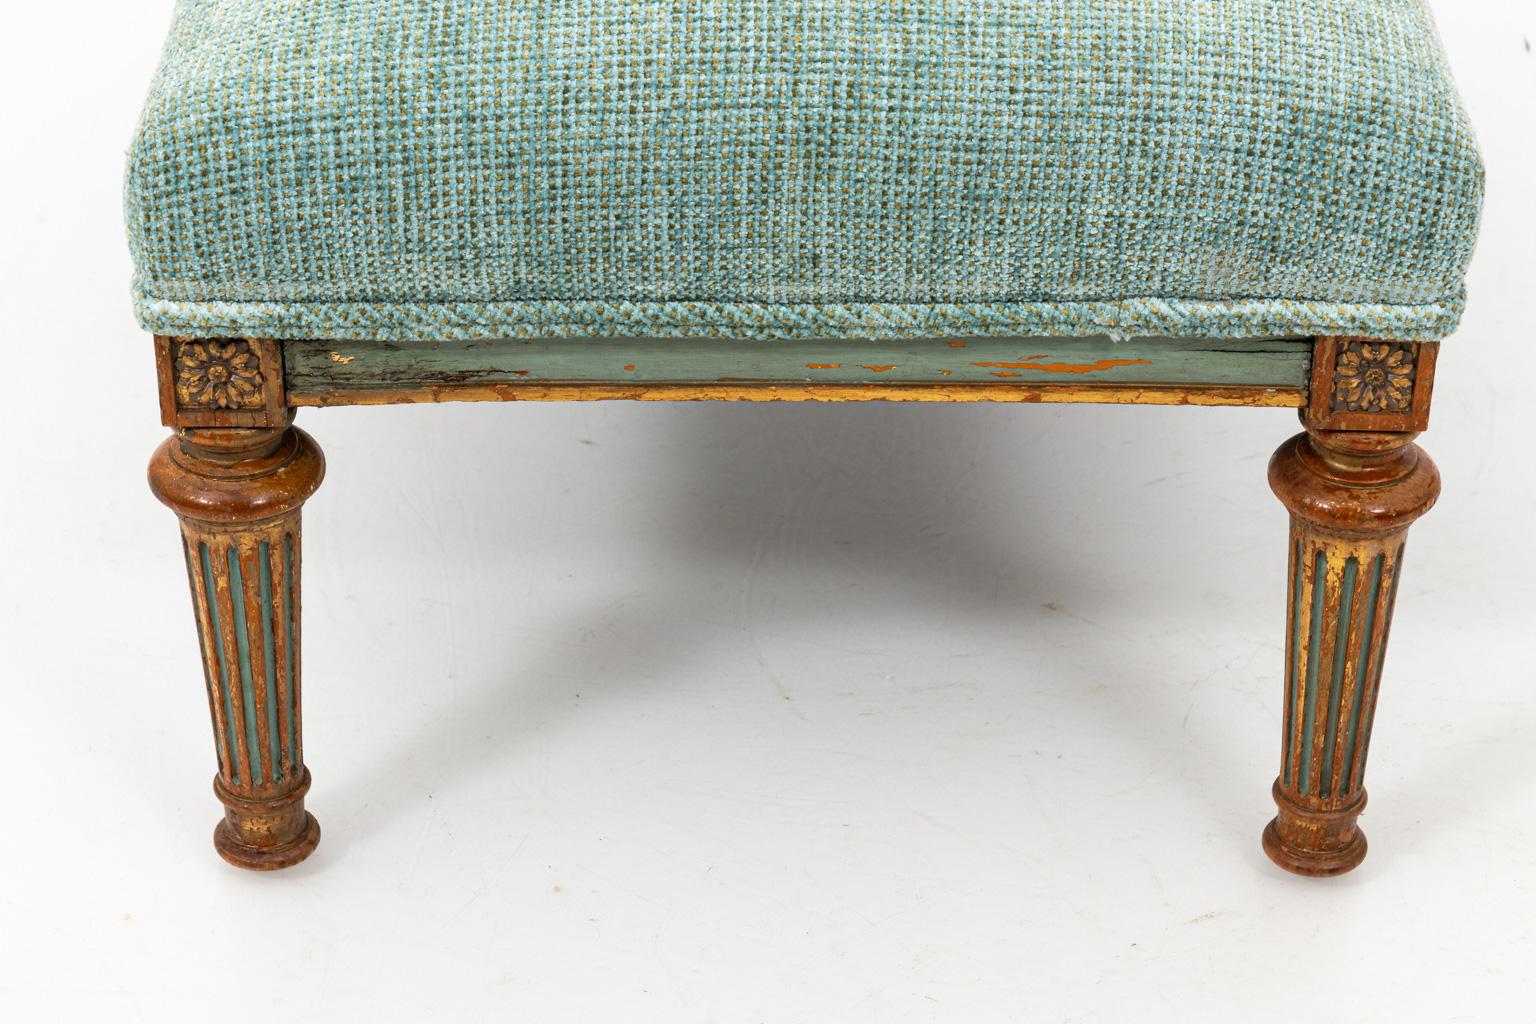 French bench in the Louis XV style, newly upholstered in a green painted finish, circa late 19th century. Please note of wear consistent with age. Made in France.